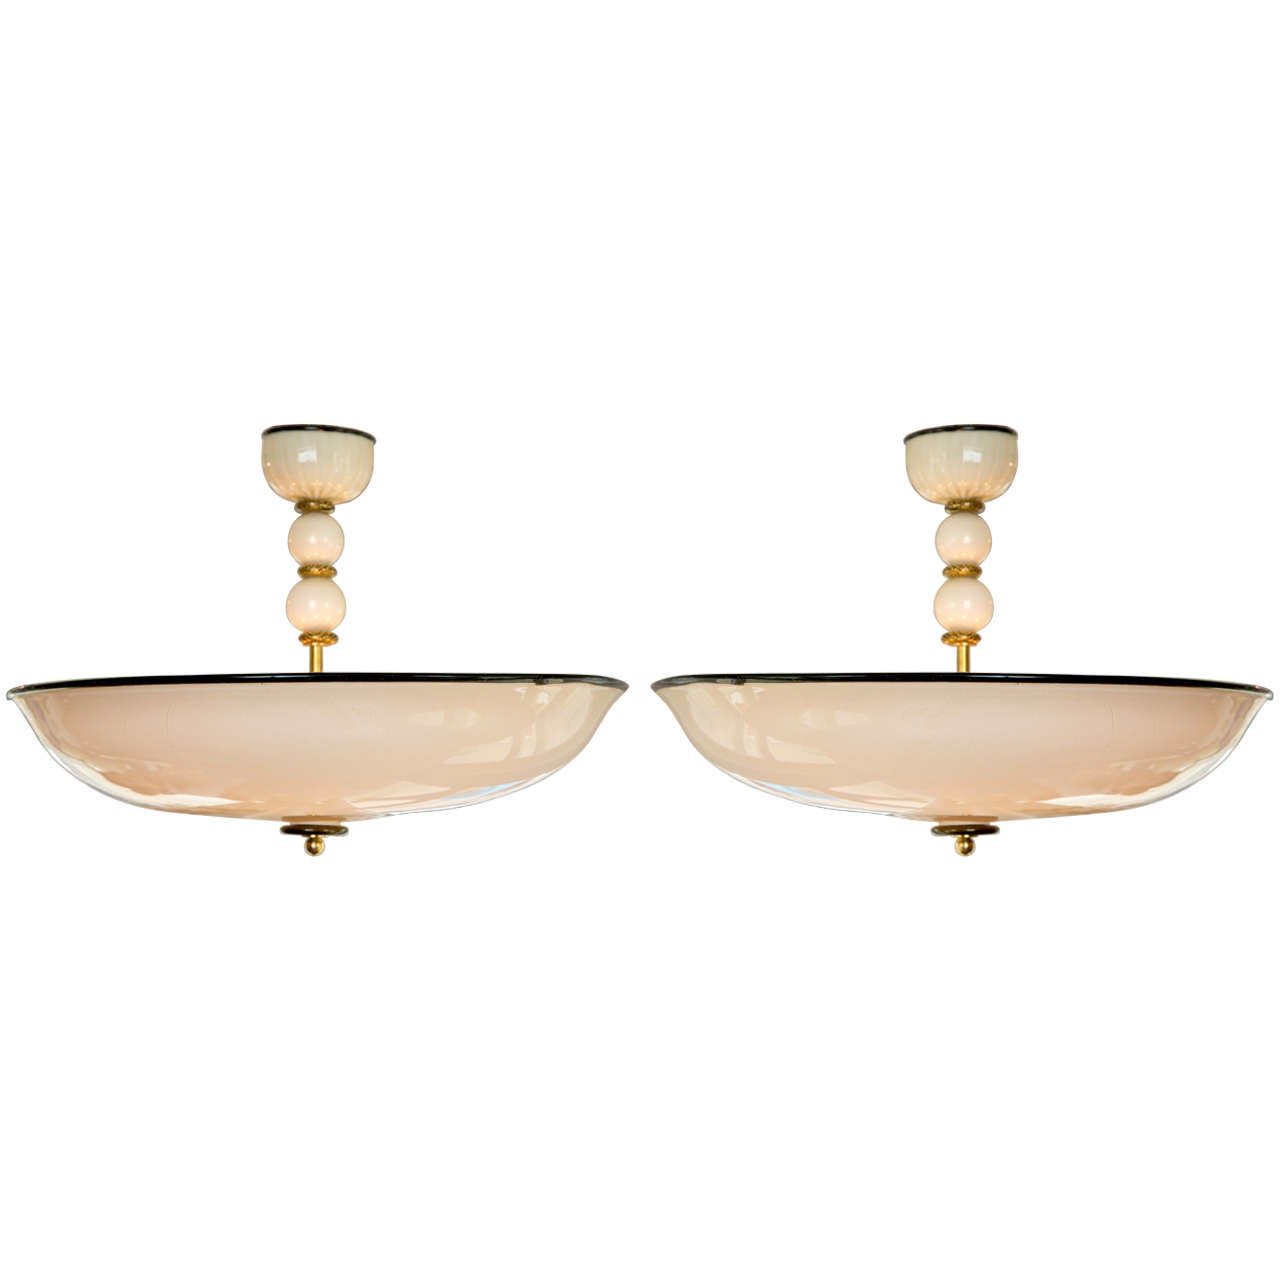 A striking mouth blown Murano Chandeliers in a pearled creme color   with black and gold detailing.  These lights are rewired for five lights up to 60 watts each.  The brass stem is only evident when eye level with the fixture.